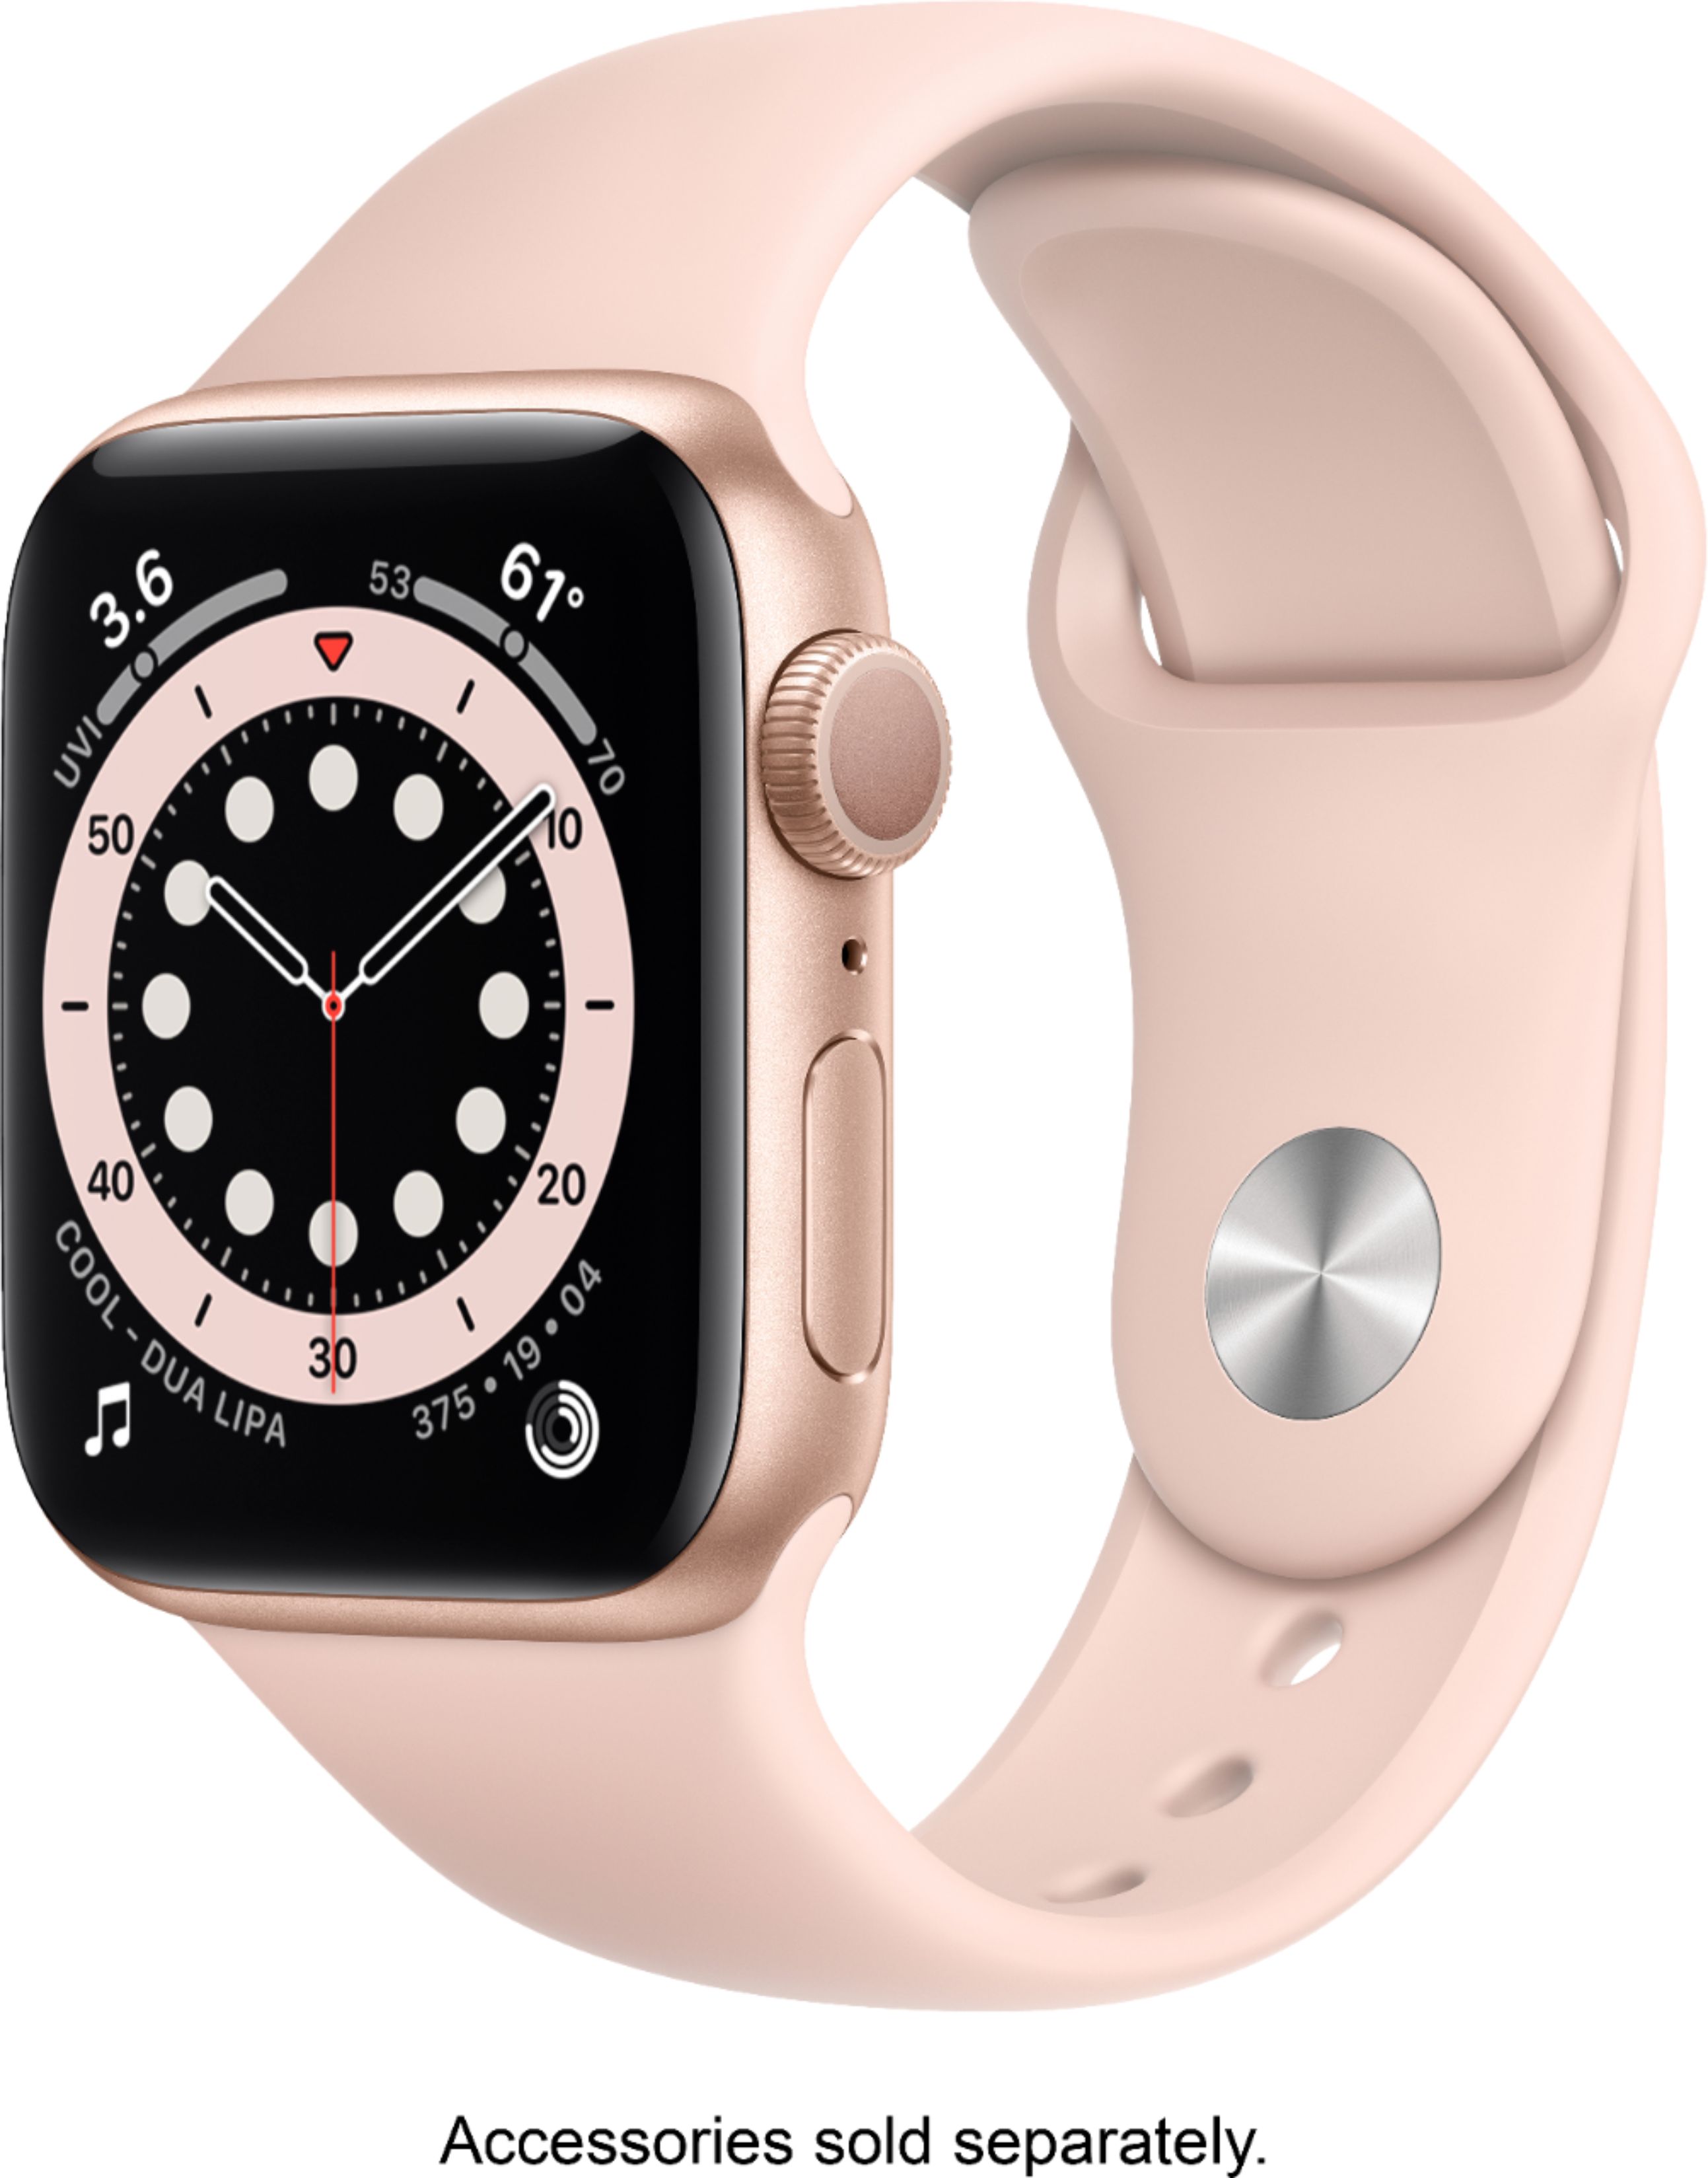 Apple watch 6 pink i guess so